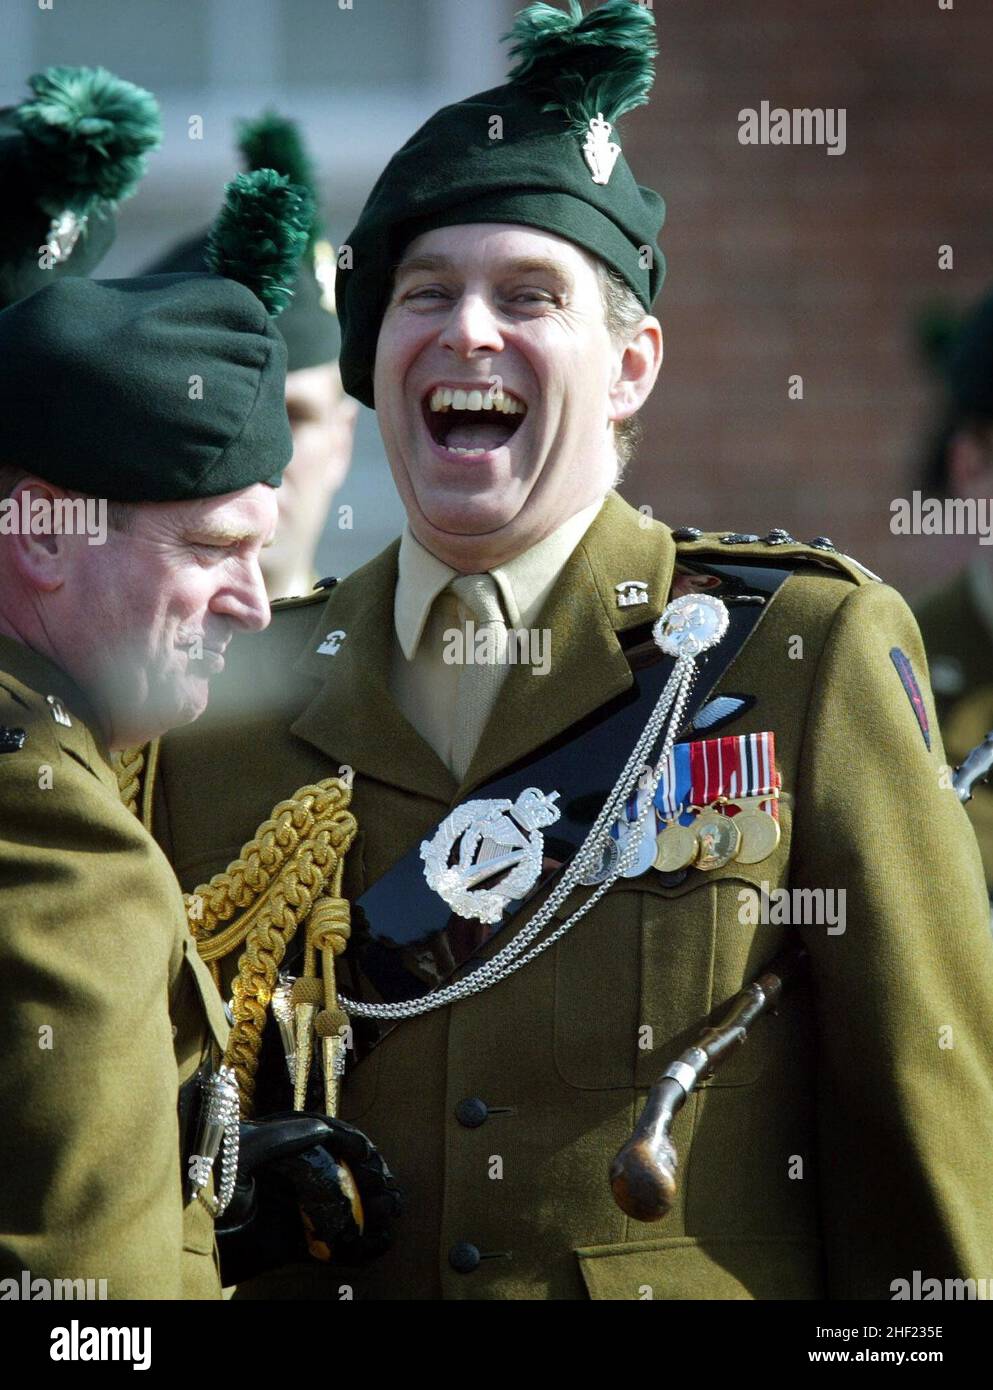 File photo dated 17/3/2003 of the Duke of York, who is Colonel in Chief of the Royal Irish Regiment, jokes with new recruits to the regiment, at a passing out parade at the Regiment's Headquarters in Ballymena, Northern Ireland. The Duke's military affiliations and royal patronages have been returned to the Queen, Buckingham Palace has announced. Issue date: Thursday January 13, 2022. Stock Photo